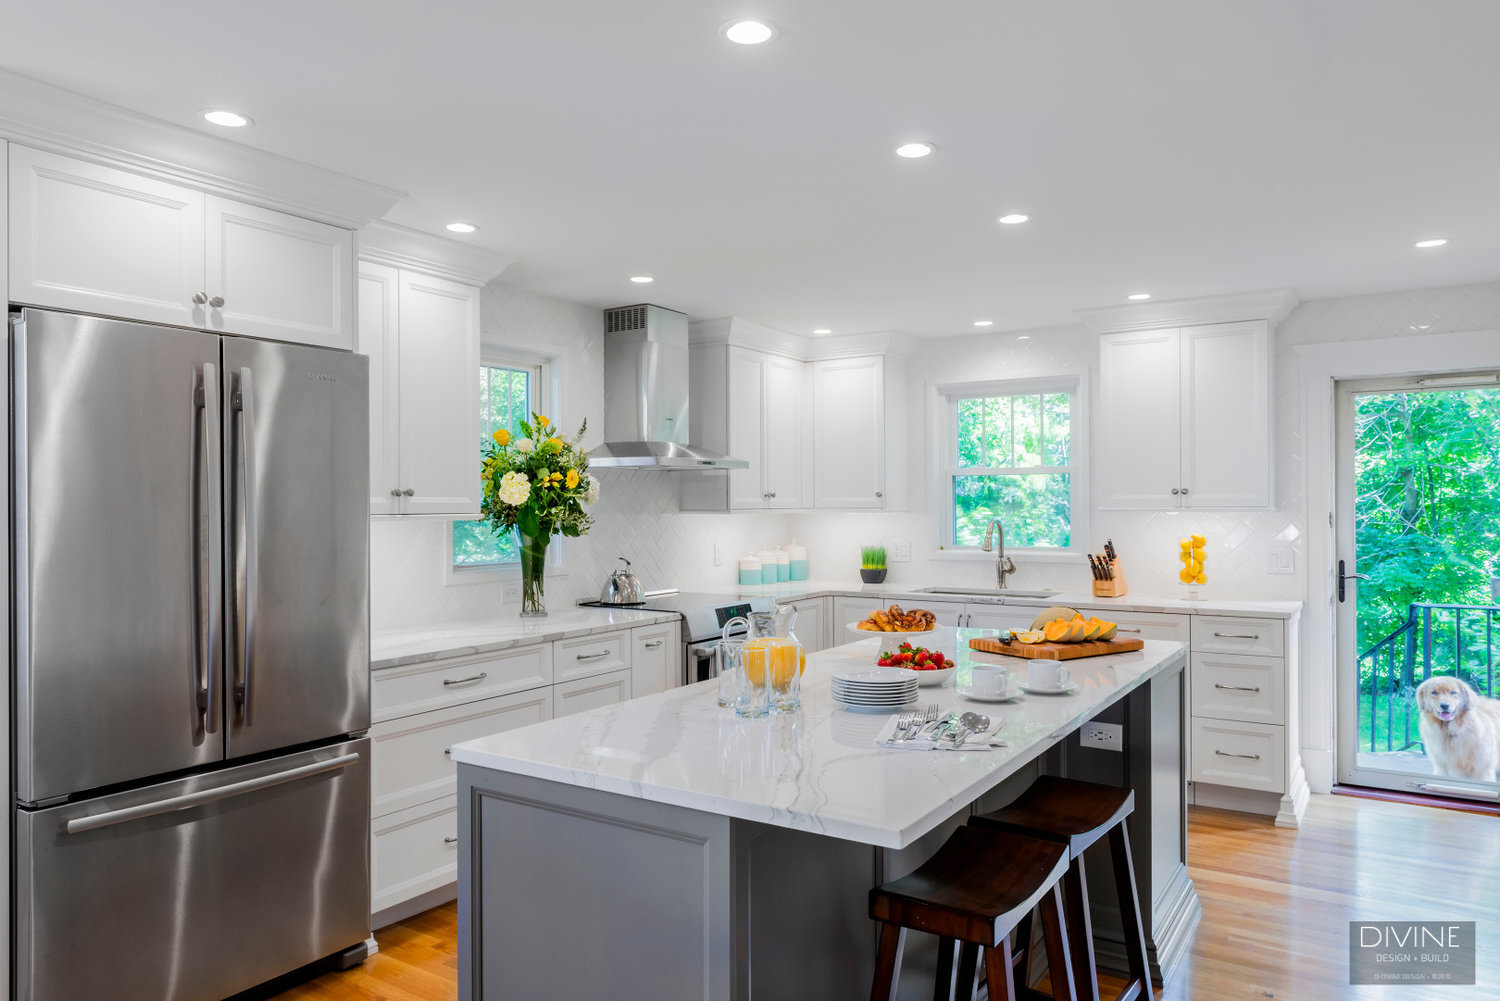  White and grey transitional style kitchen with shaker cabinets and stainless steel appliances. beveled subway tile backsplash in white. 